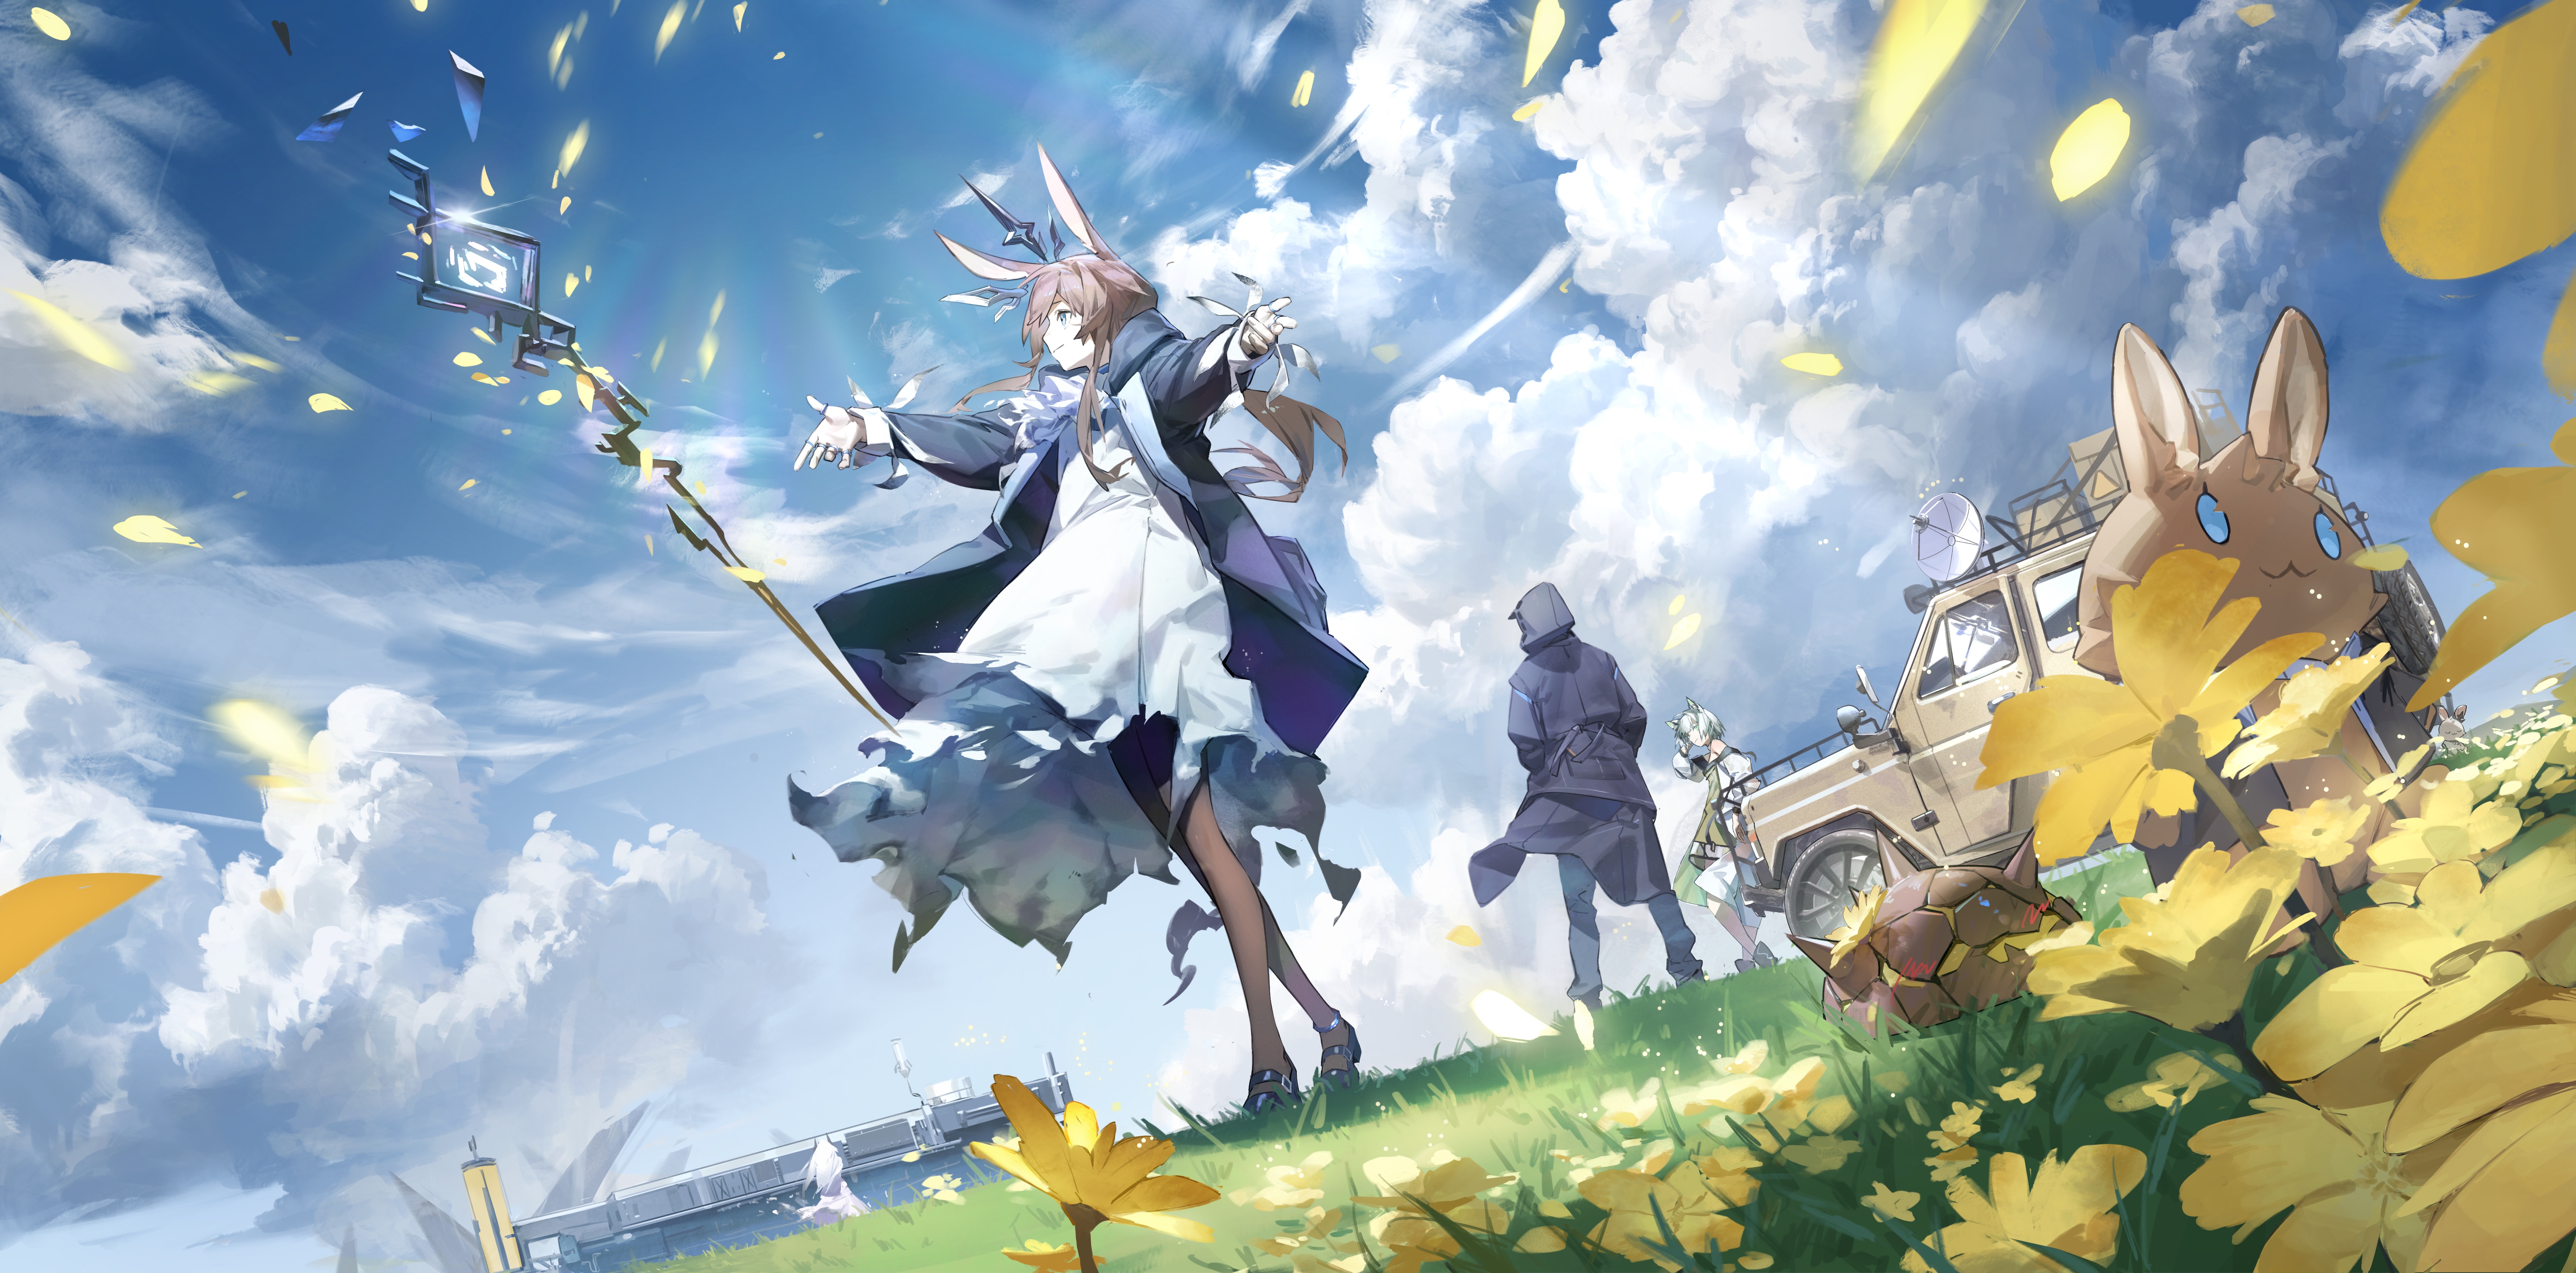 Anime 7142x3530 Arknights animal ears Amiya (Arknights) clouds Doctor (Arknights) coats Kal'tsit (Arknights) grass low-angle group of people flowers sky car yellow flowers cumulus